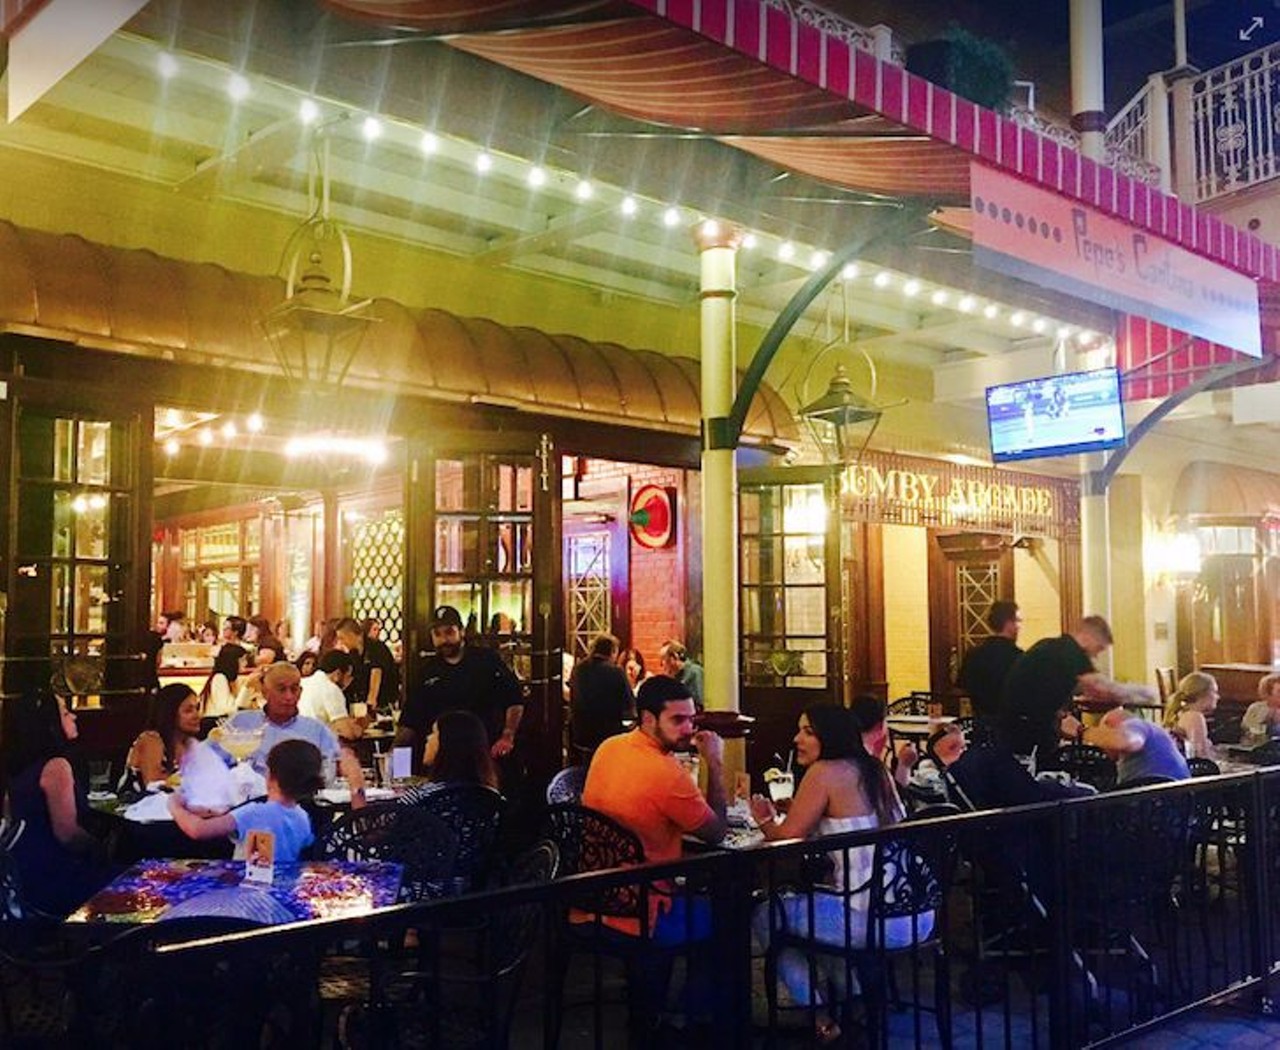 8 24-hour Restaurants And Eateries In Orlando, Florida